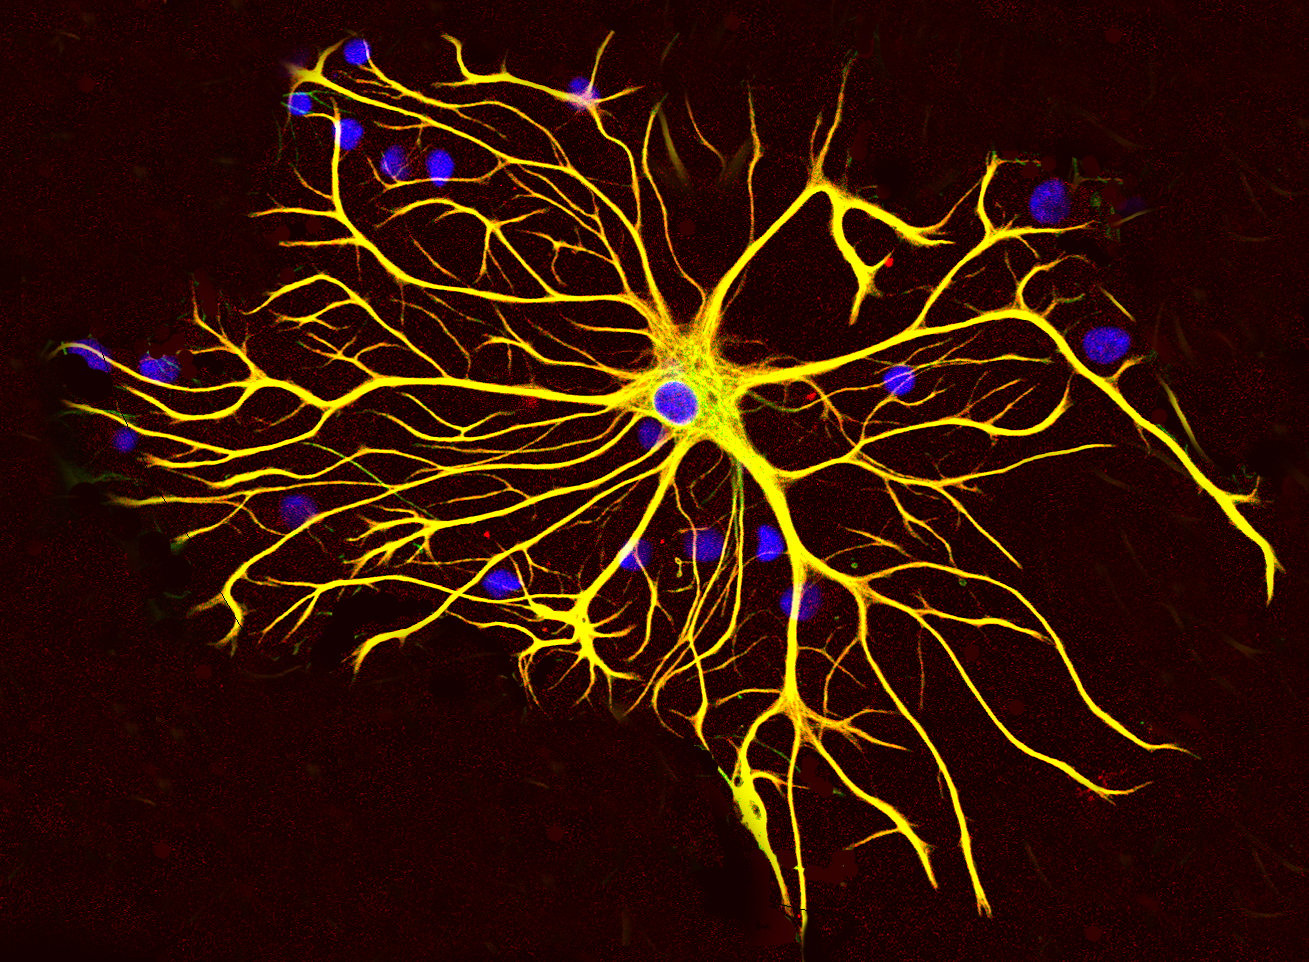 An astrocyte cell grown in tissue culture stained with antibodies to GFAP and vimentin